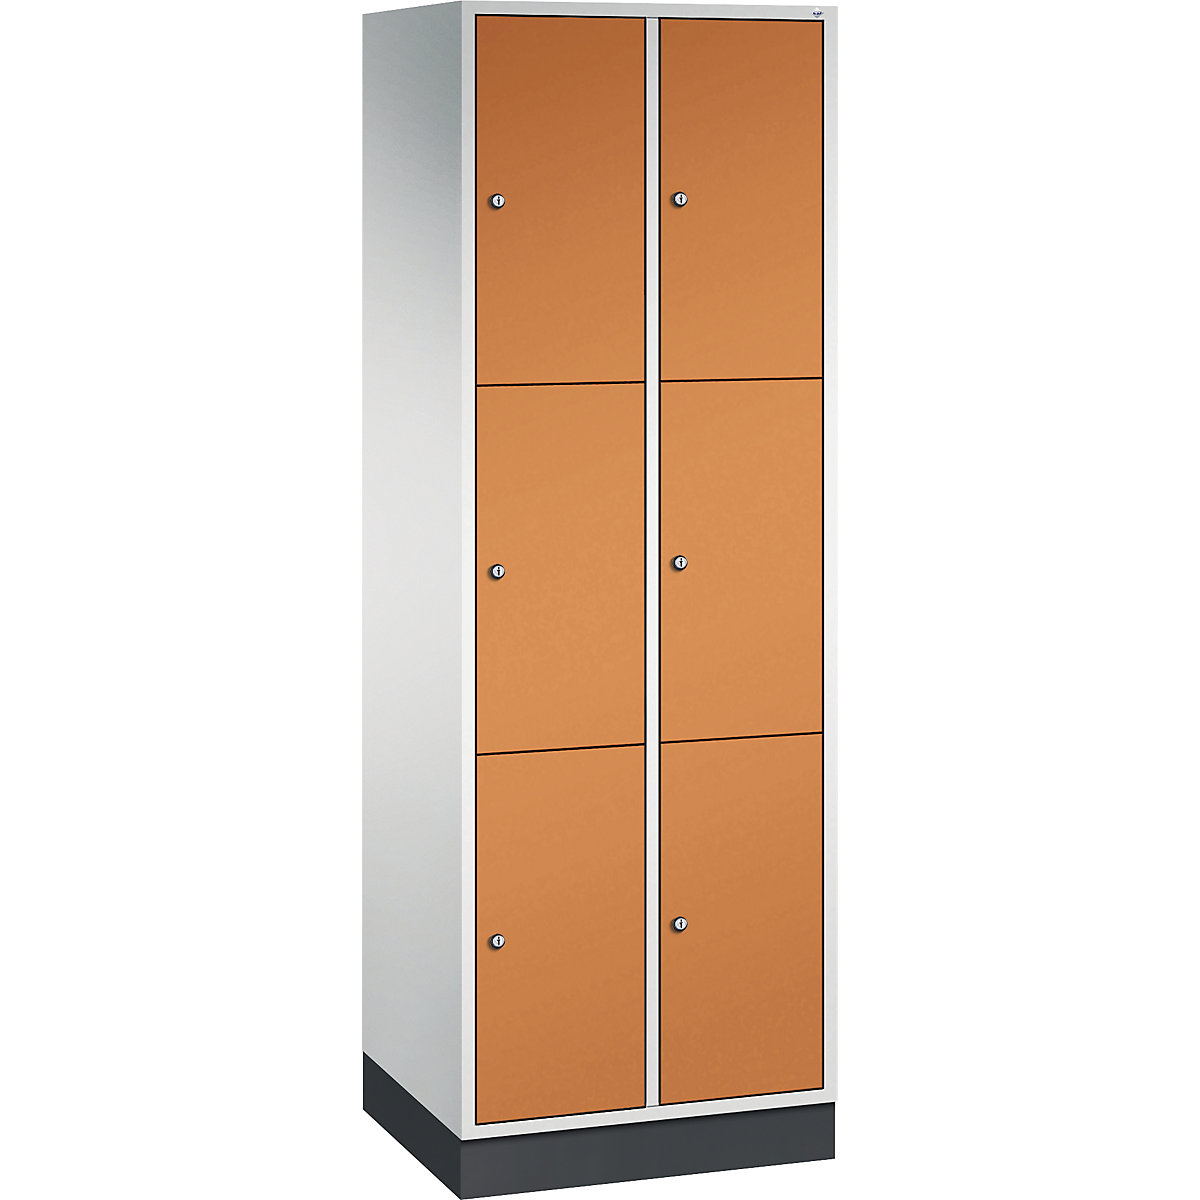 INTRO steel compartment locker, compartment height 580 mm – C+P, WxD 620 x 500 mm, 6 compartments, light grey body, yellow orange doors